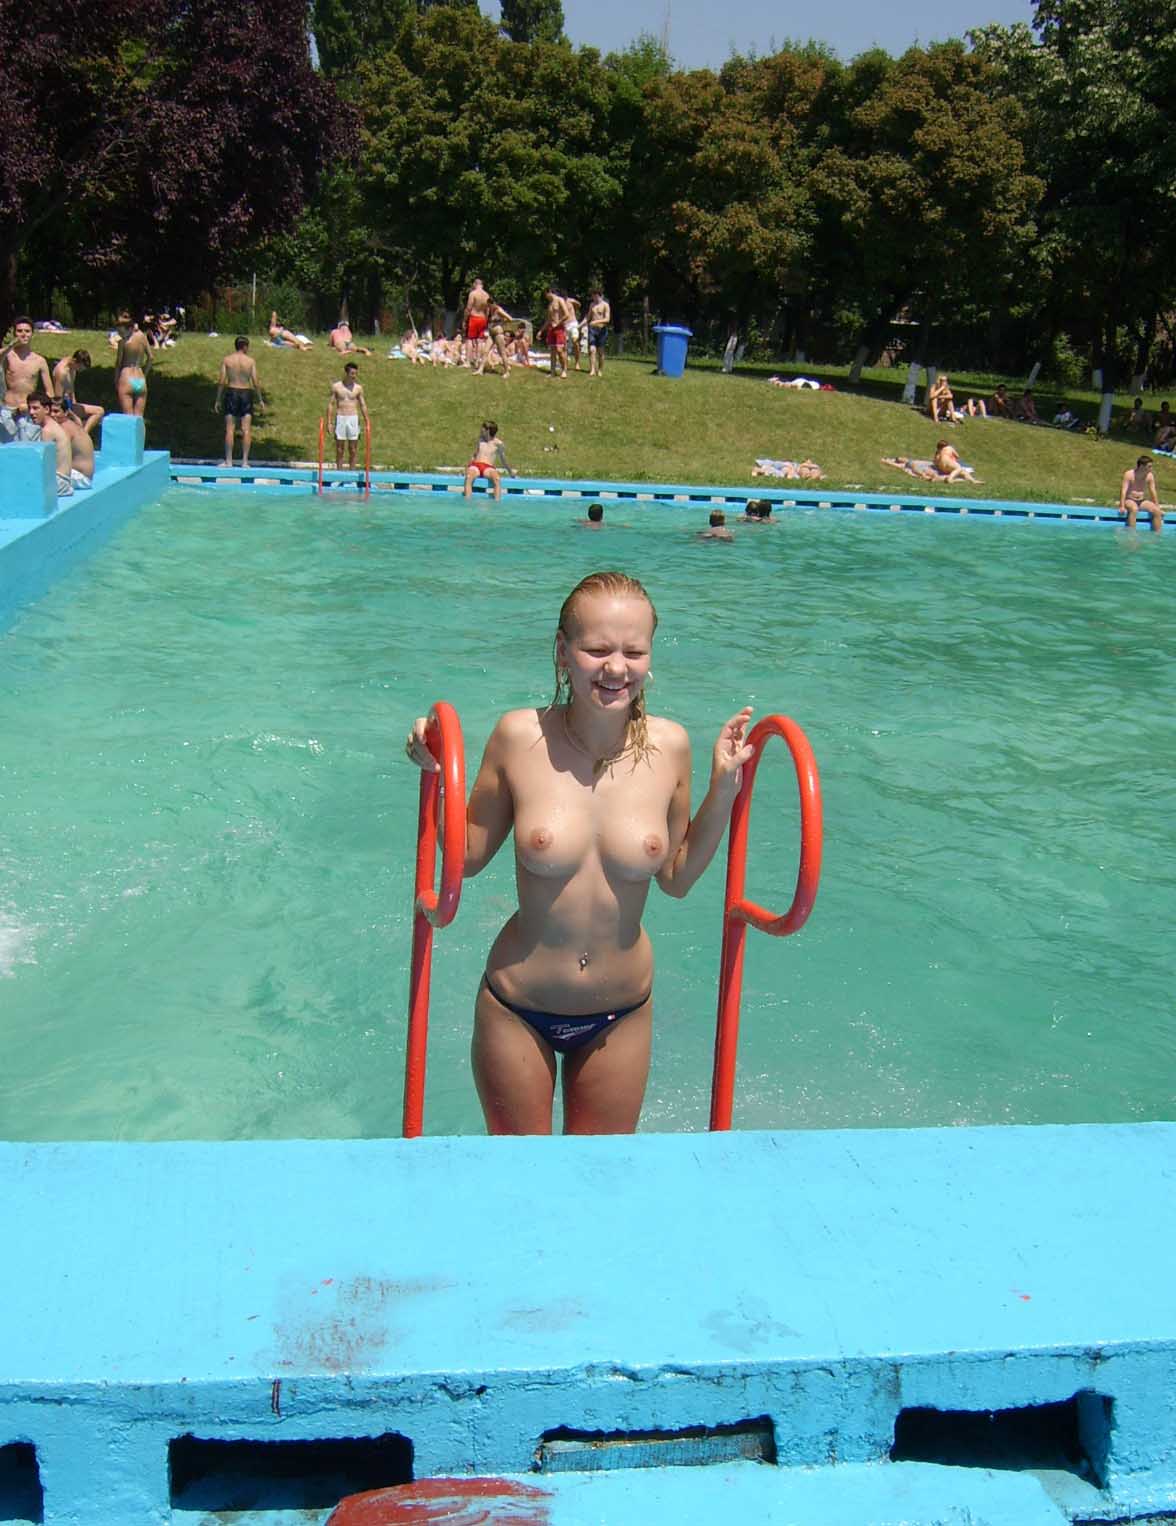 Public pool topless photo image